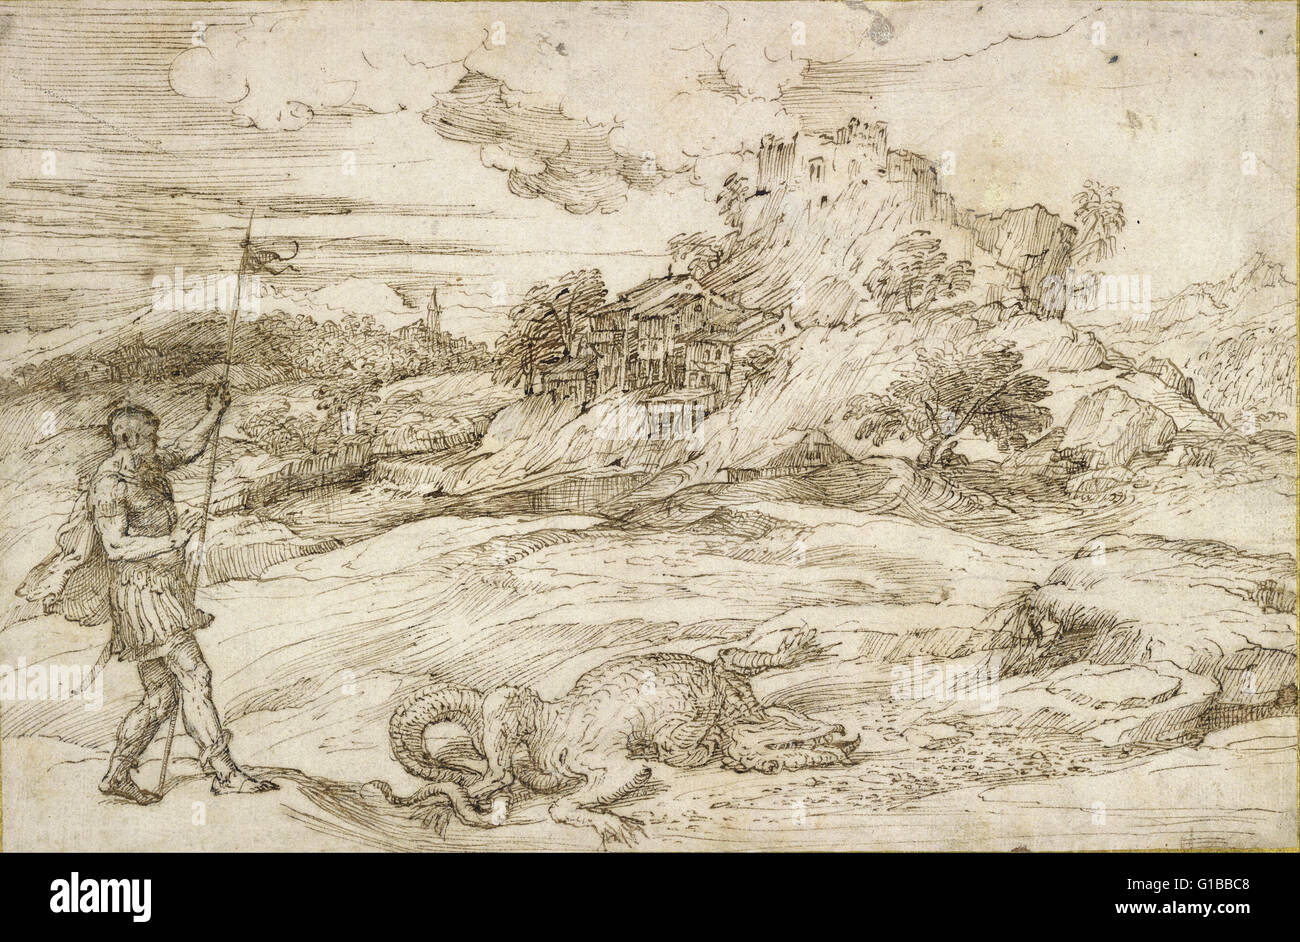 Titian - Landscape with St. Theodore Overcoming the Dragon - The Morgan Library Stock Photo